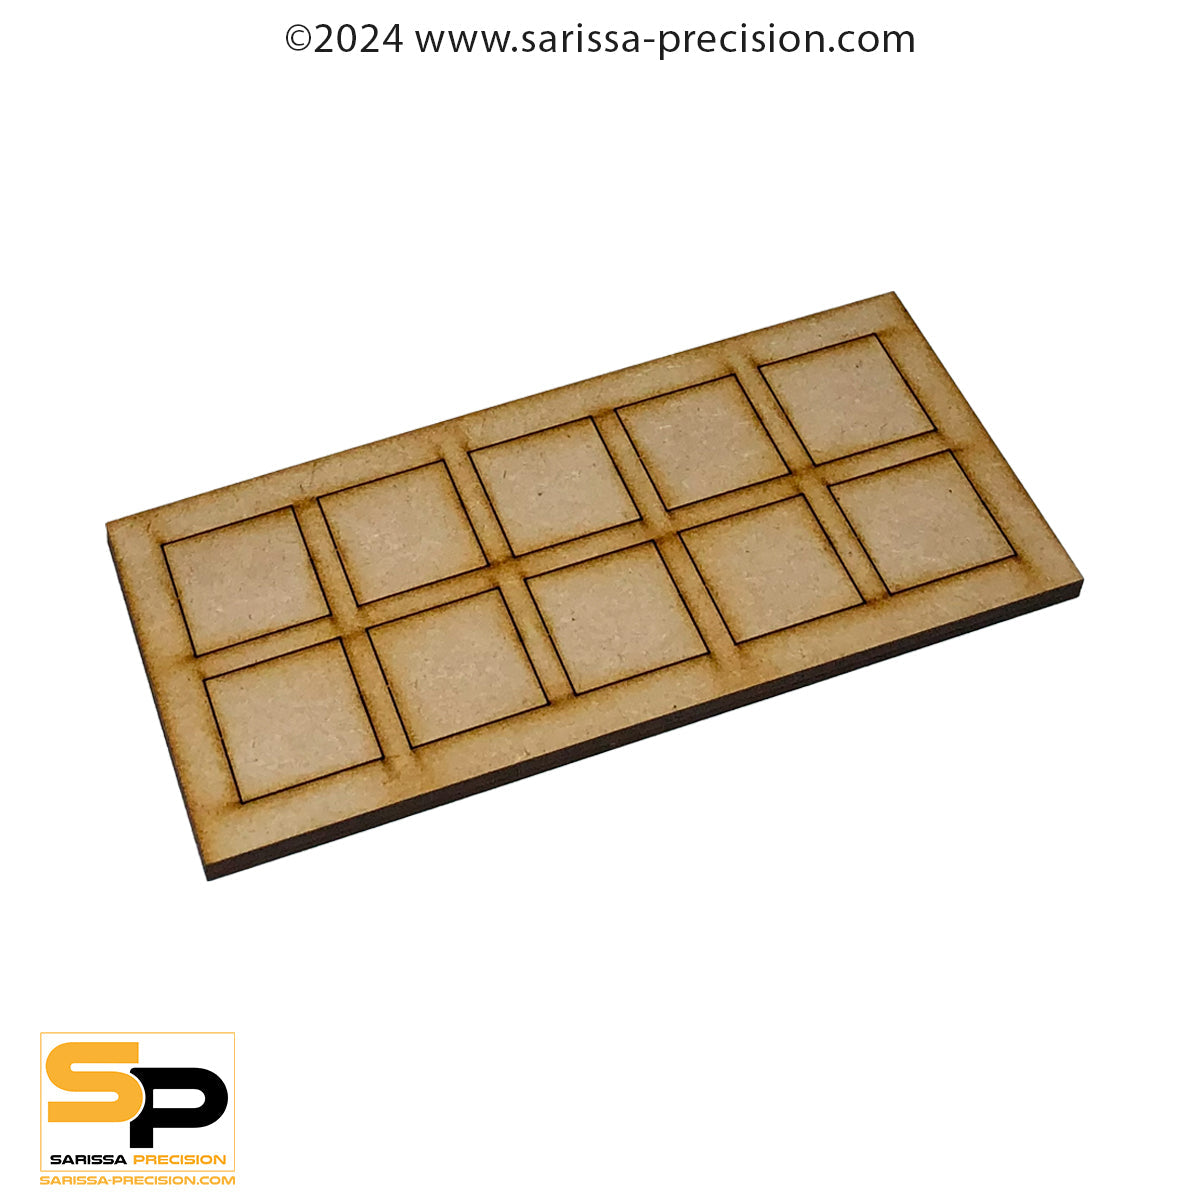 6x6 30x30mm Conversion Tray for 25x25mm bases